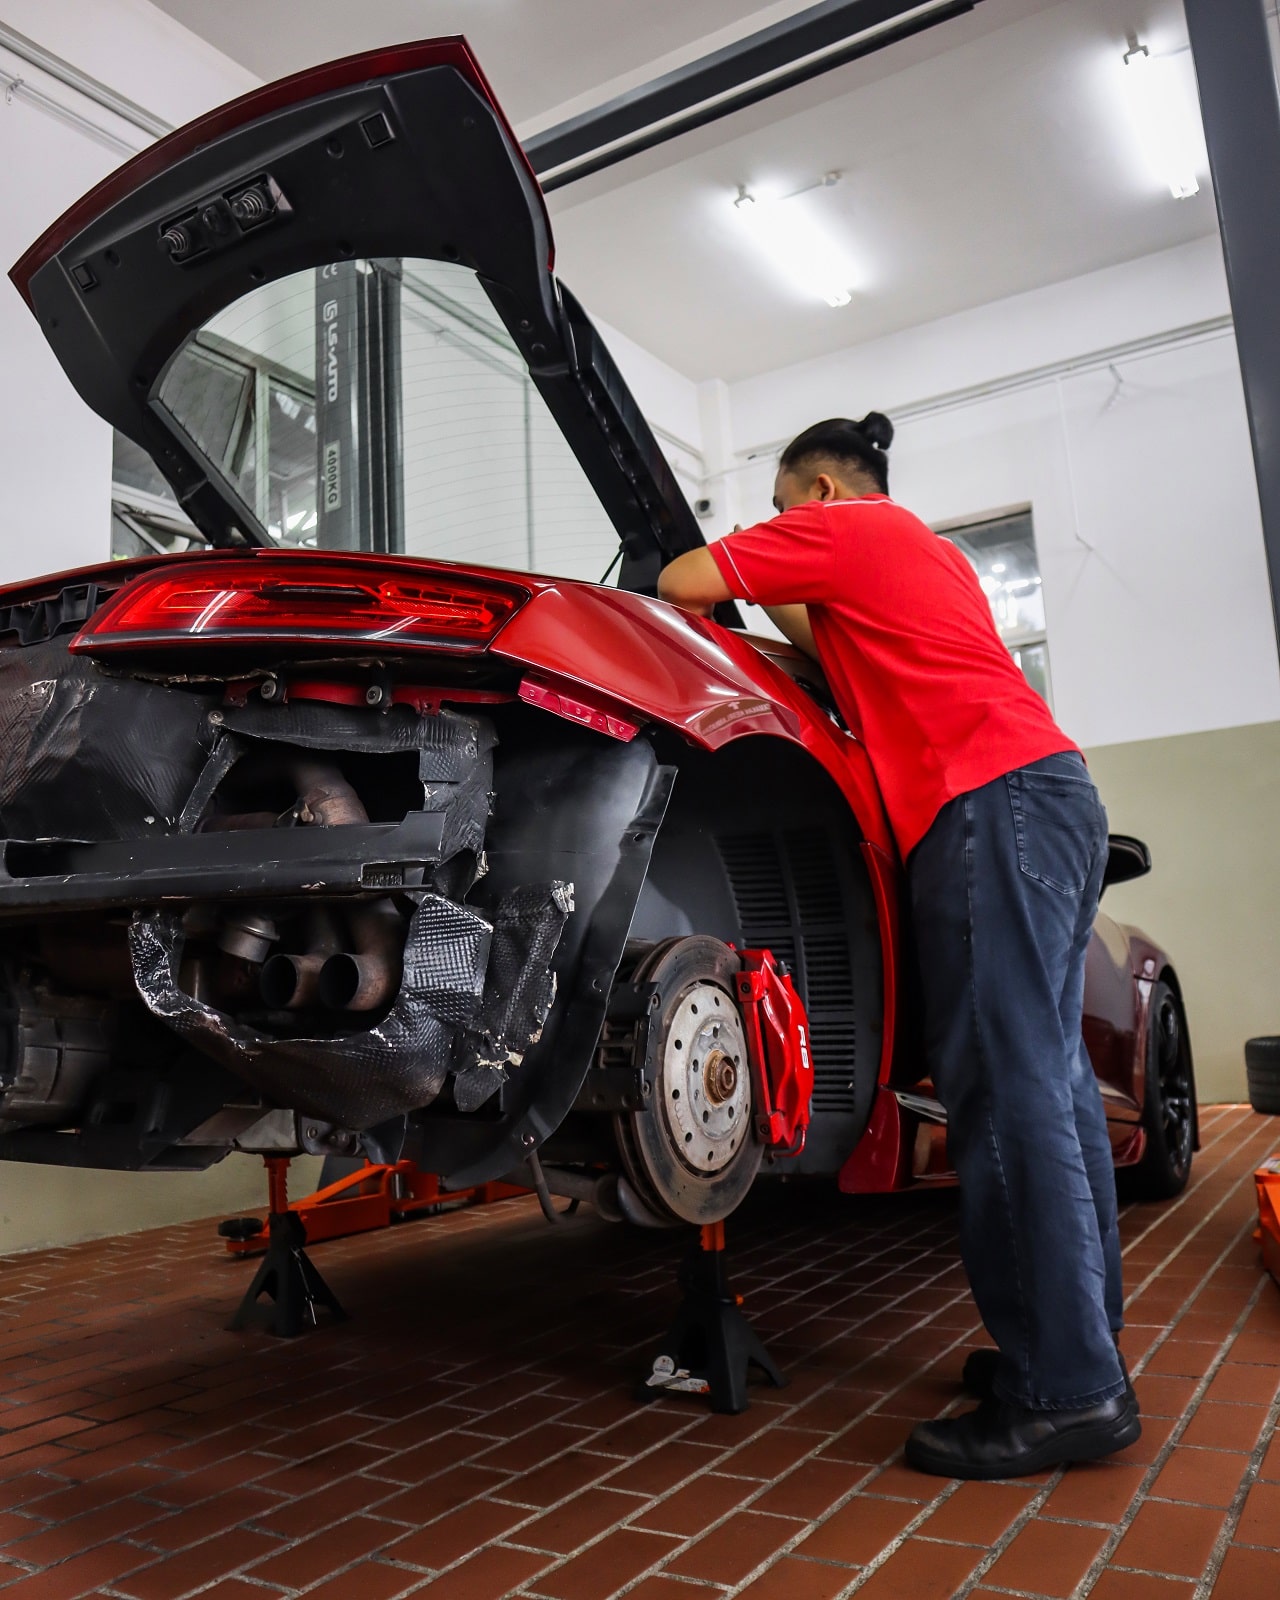 ﻿automotive diploma in Malaysia by Techtra Automotive Academy Techtra Automotive Academy (Diploma in Automotive Technology) Best Auto College in Malaysia Kuala Lumpur) 2022-2023 Automotive Technology Academy Study Diploma in Malaysia KL Kuala Lumpur - Techtra Automotive College in Malaysia